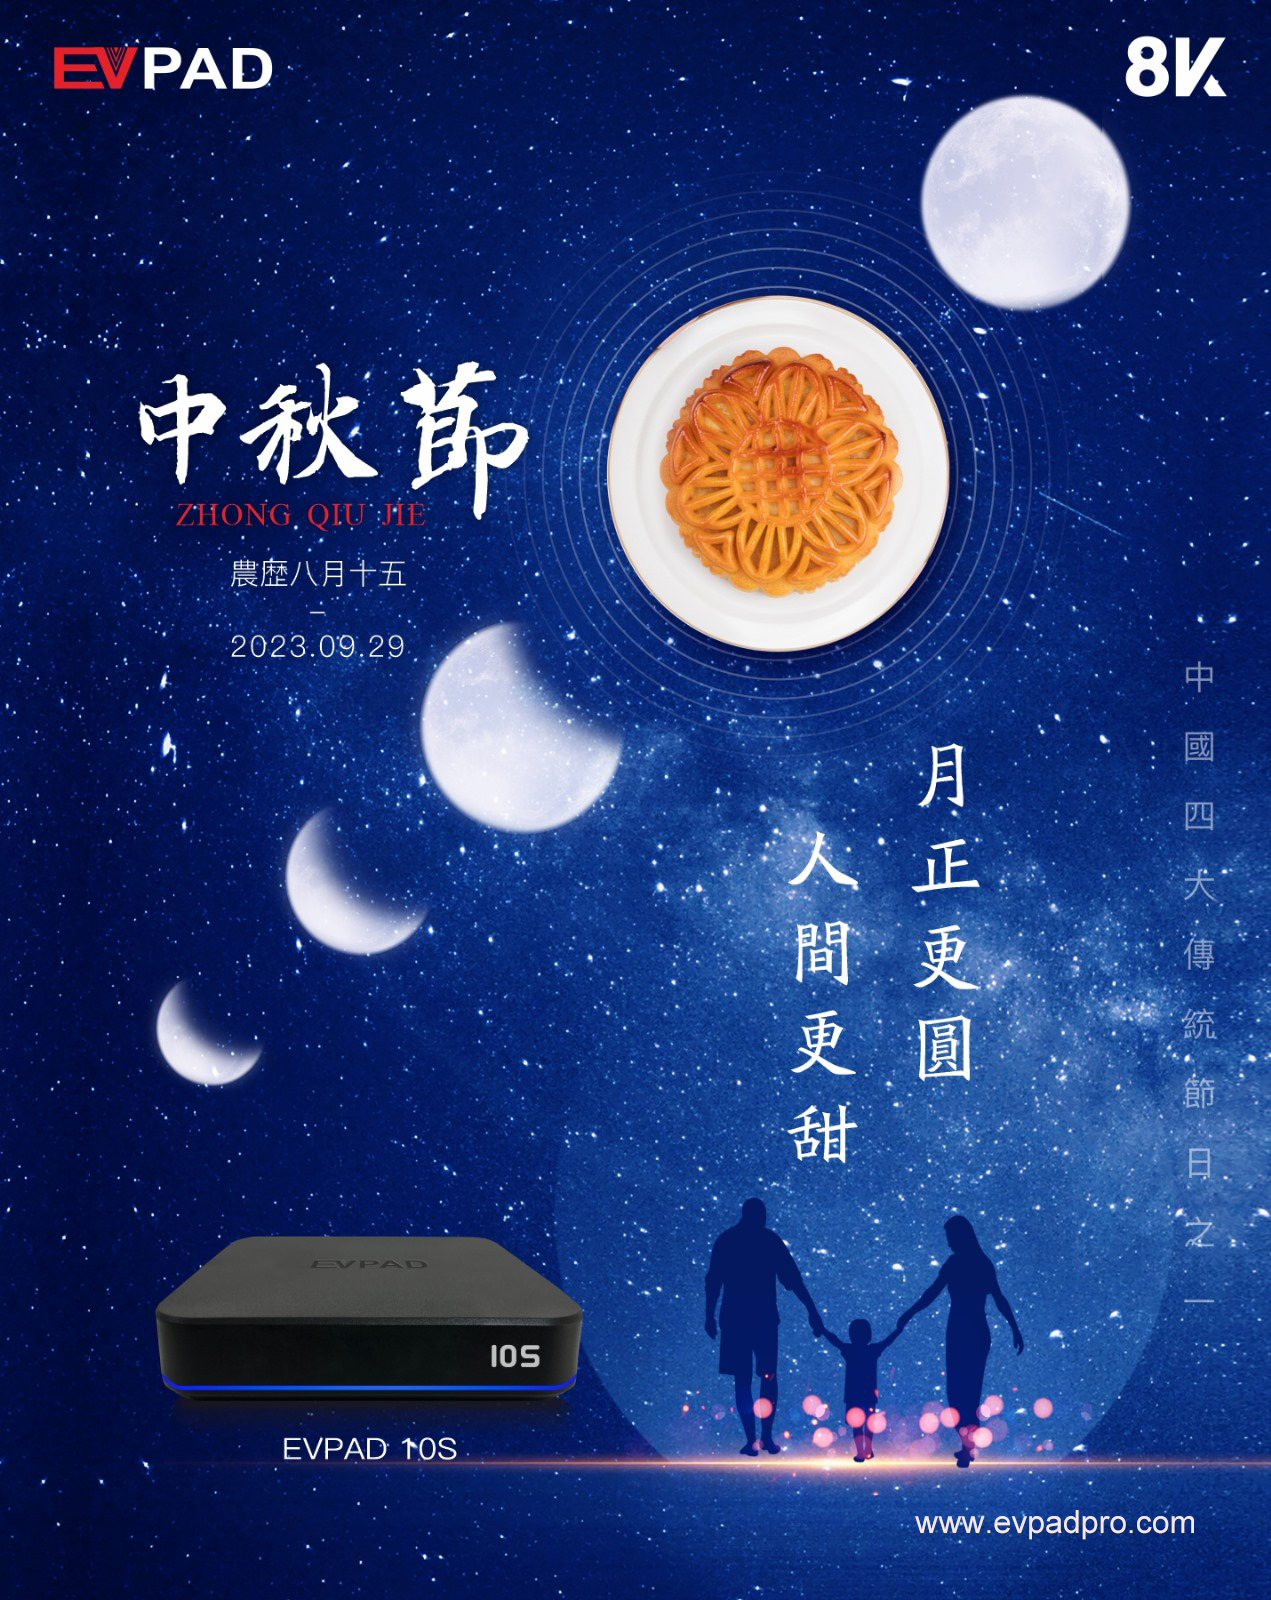 EVPAD wishes you a happy Mid-Autumn Festival!